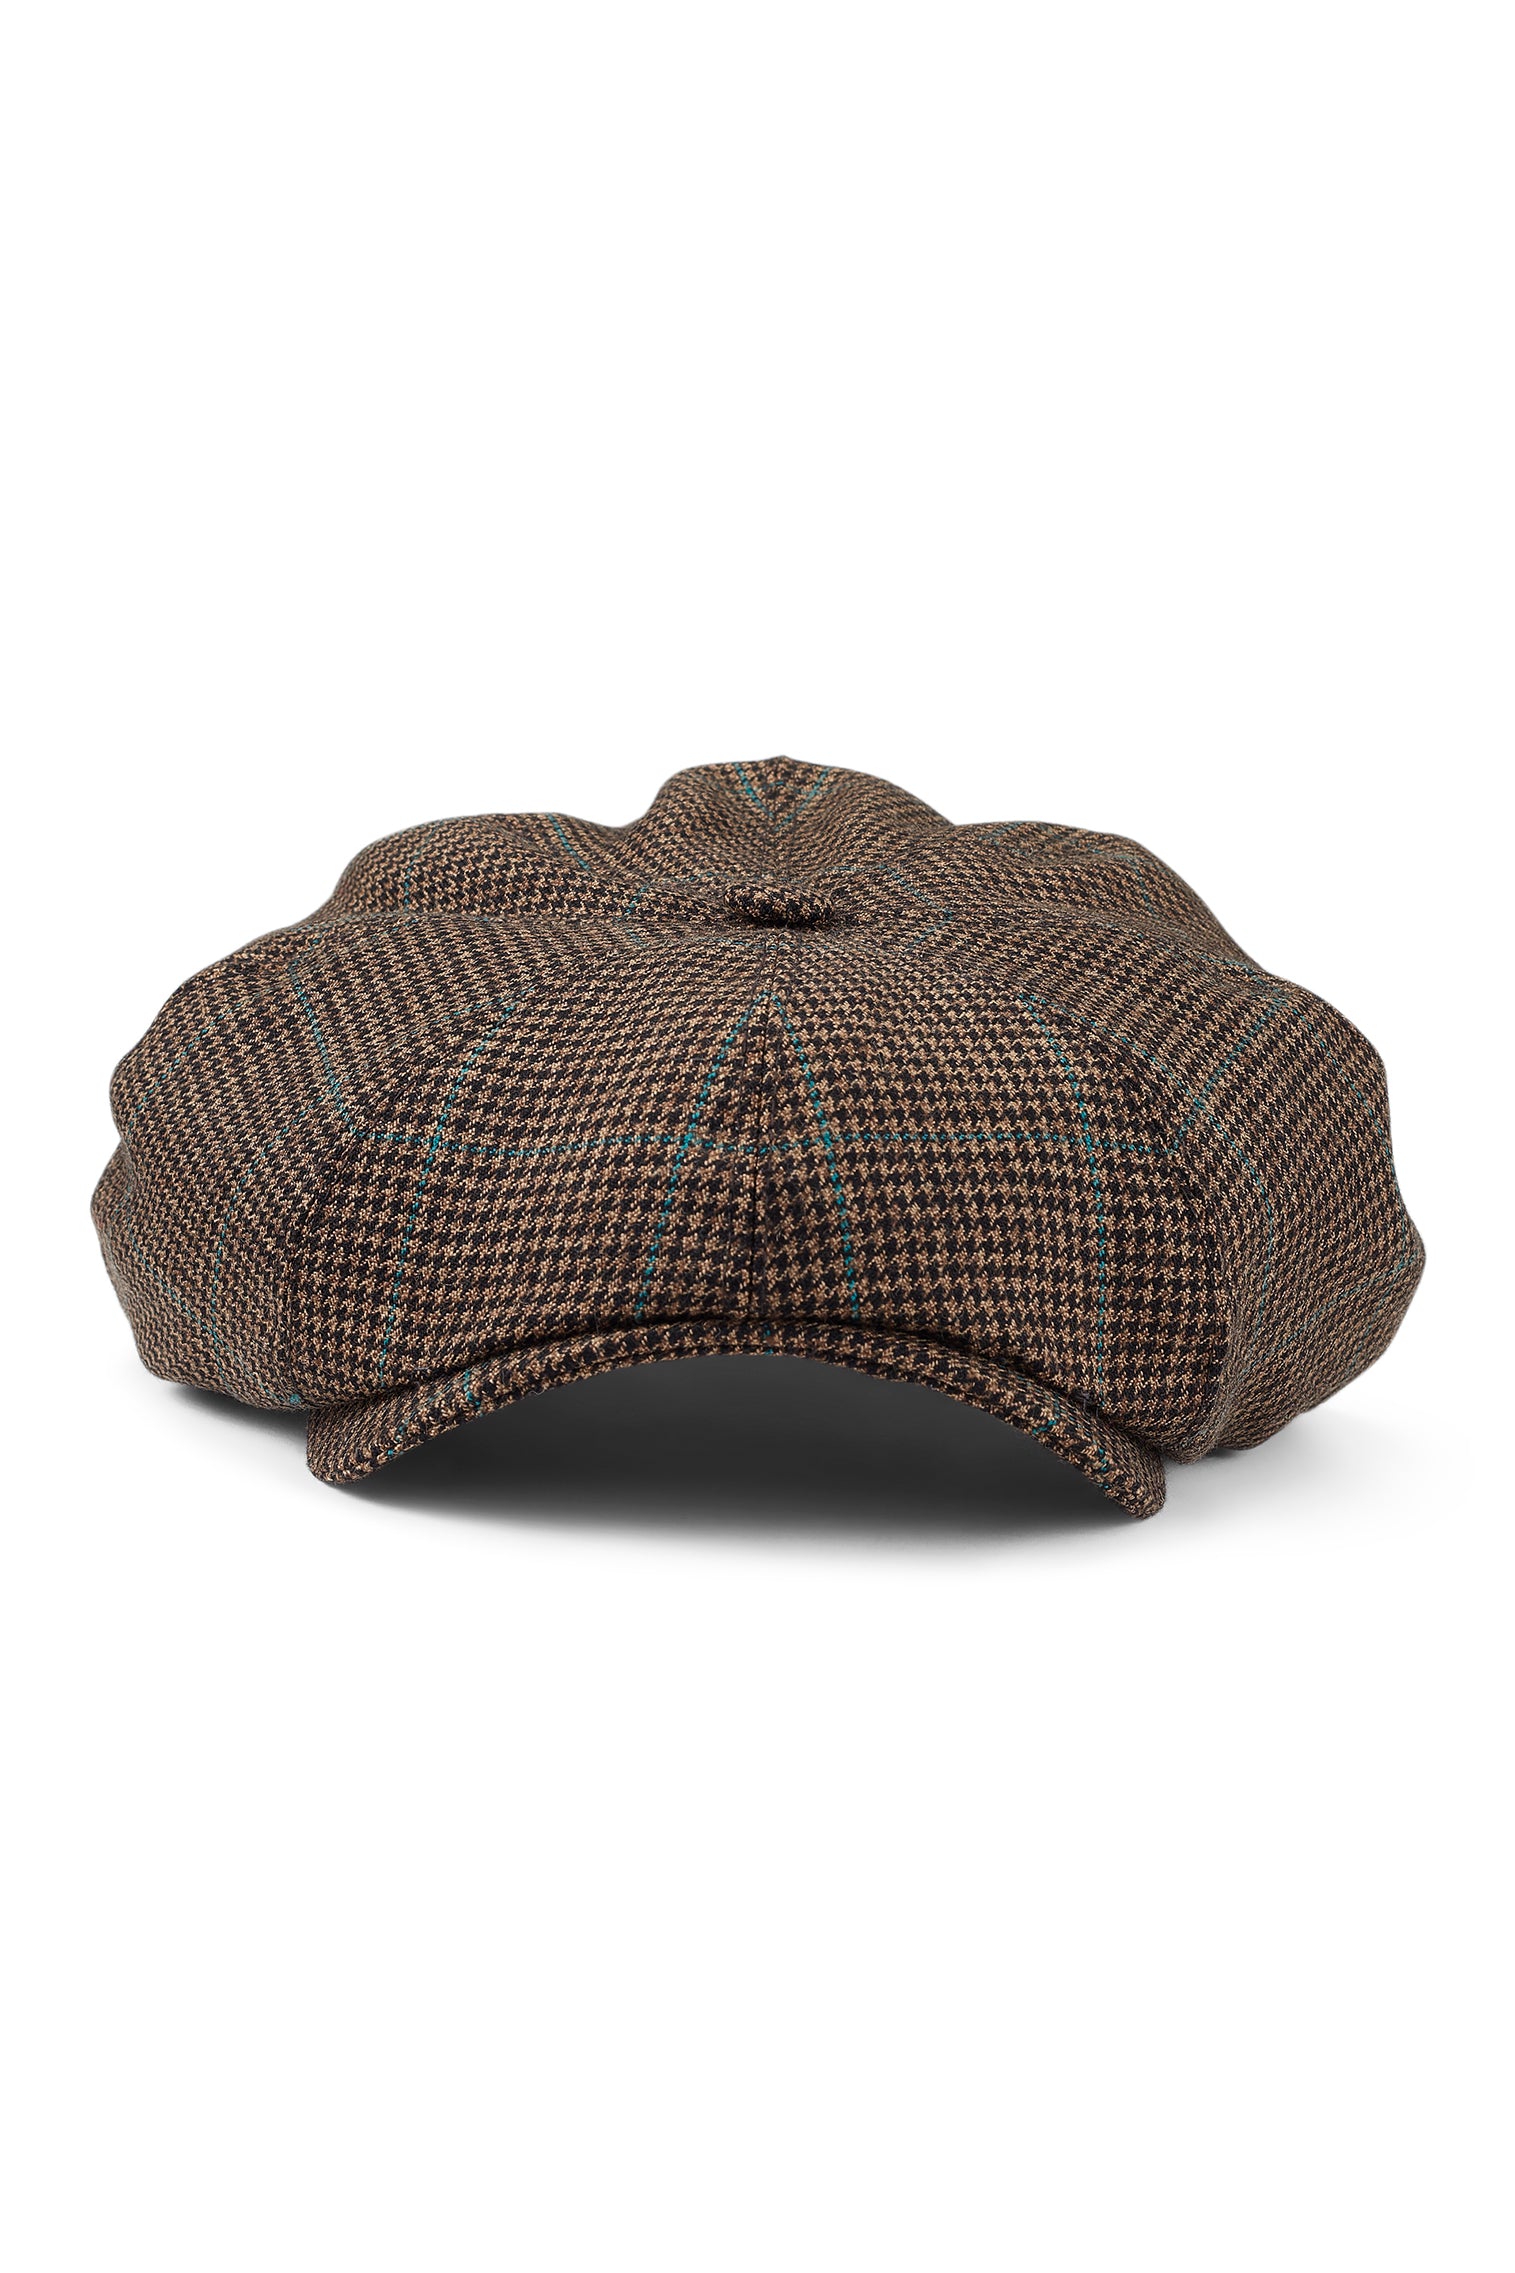 Highgrove Brown Bakerboy Cap - Limited Edition Collection - Lock & Co. Hatters London UK